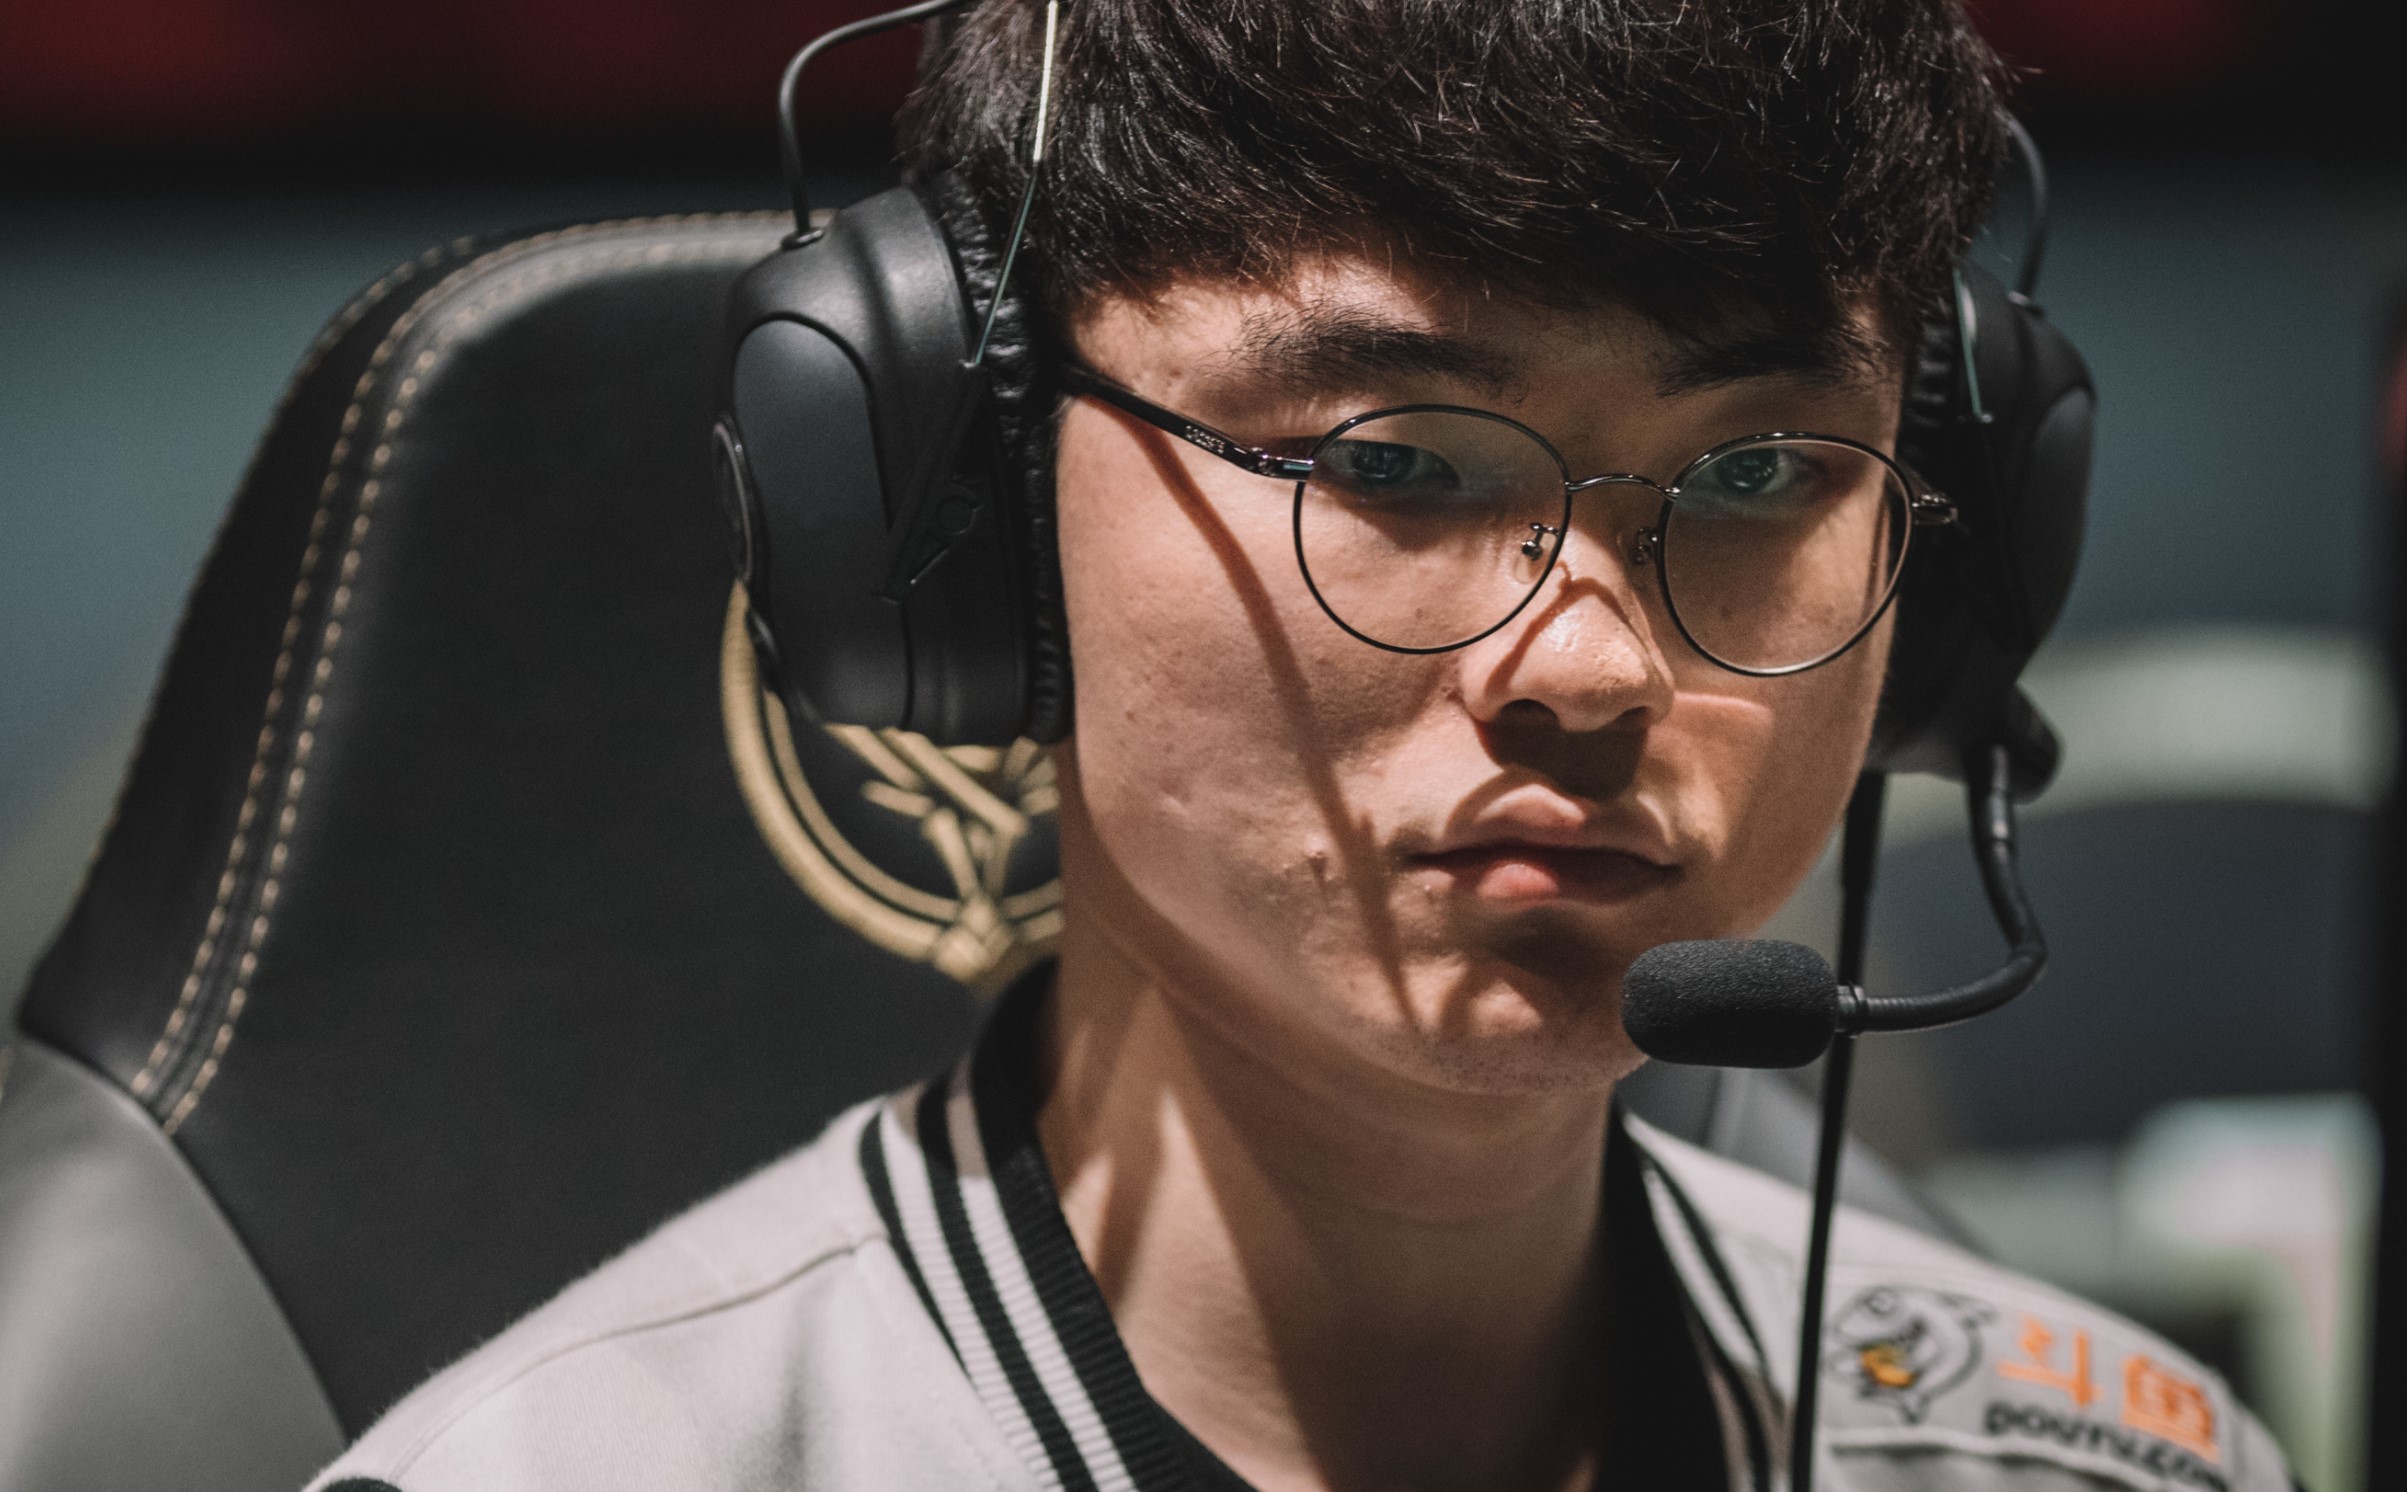 Faker gets excited about pentakills in solo queue too - The Rift Herald